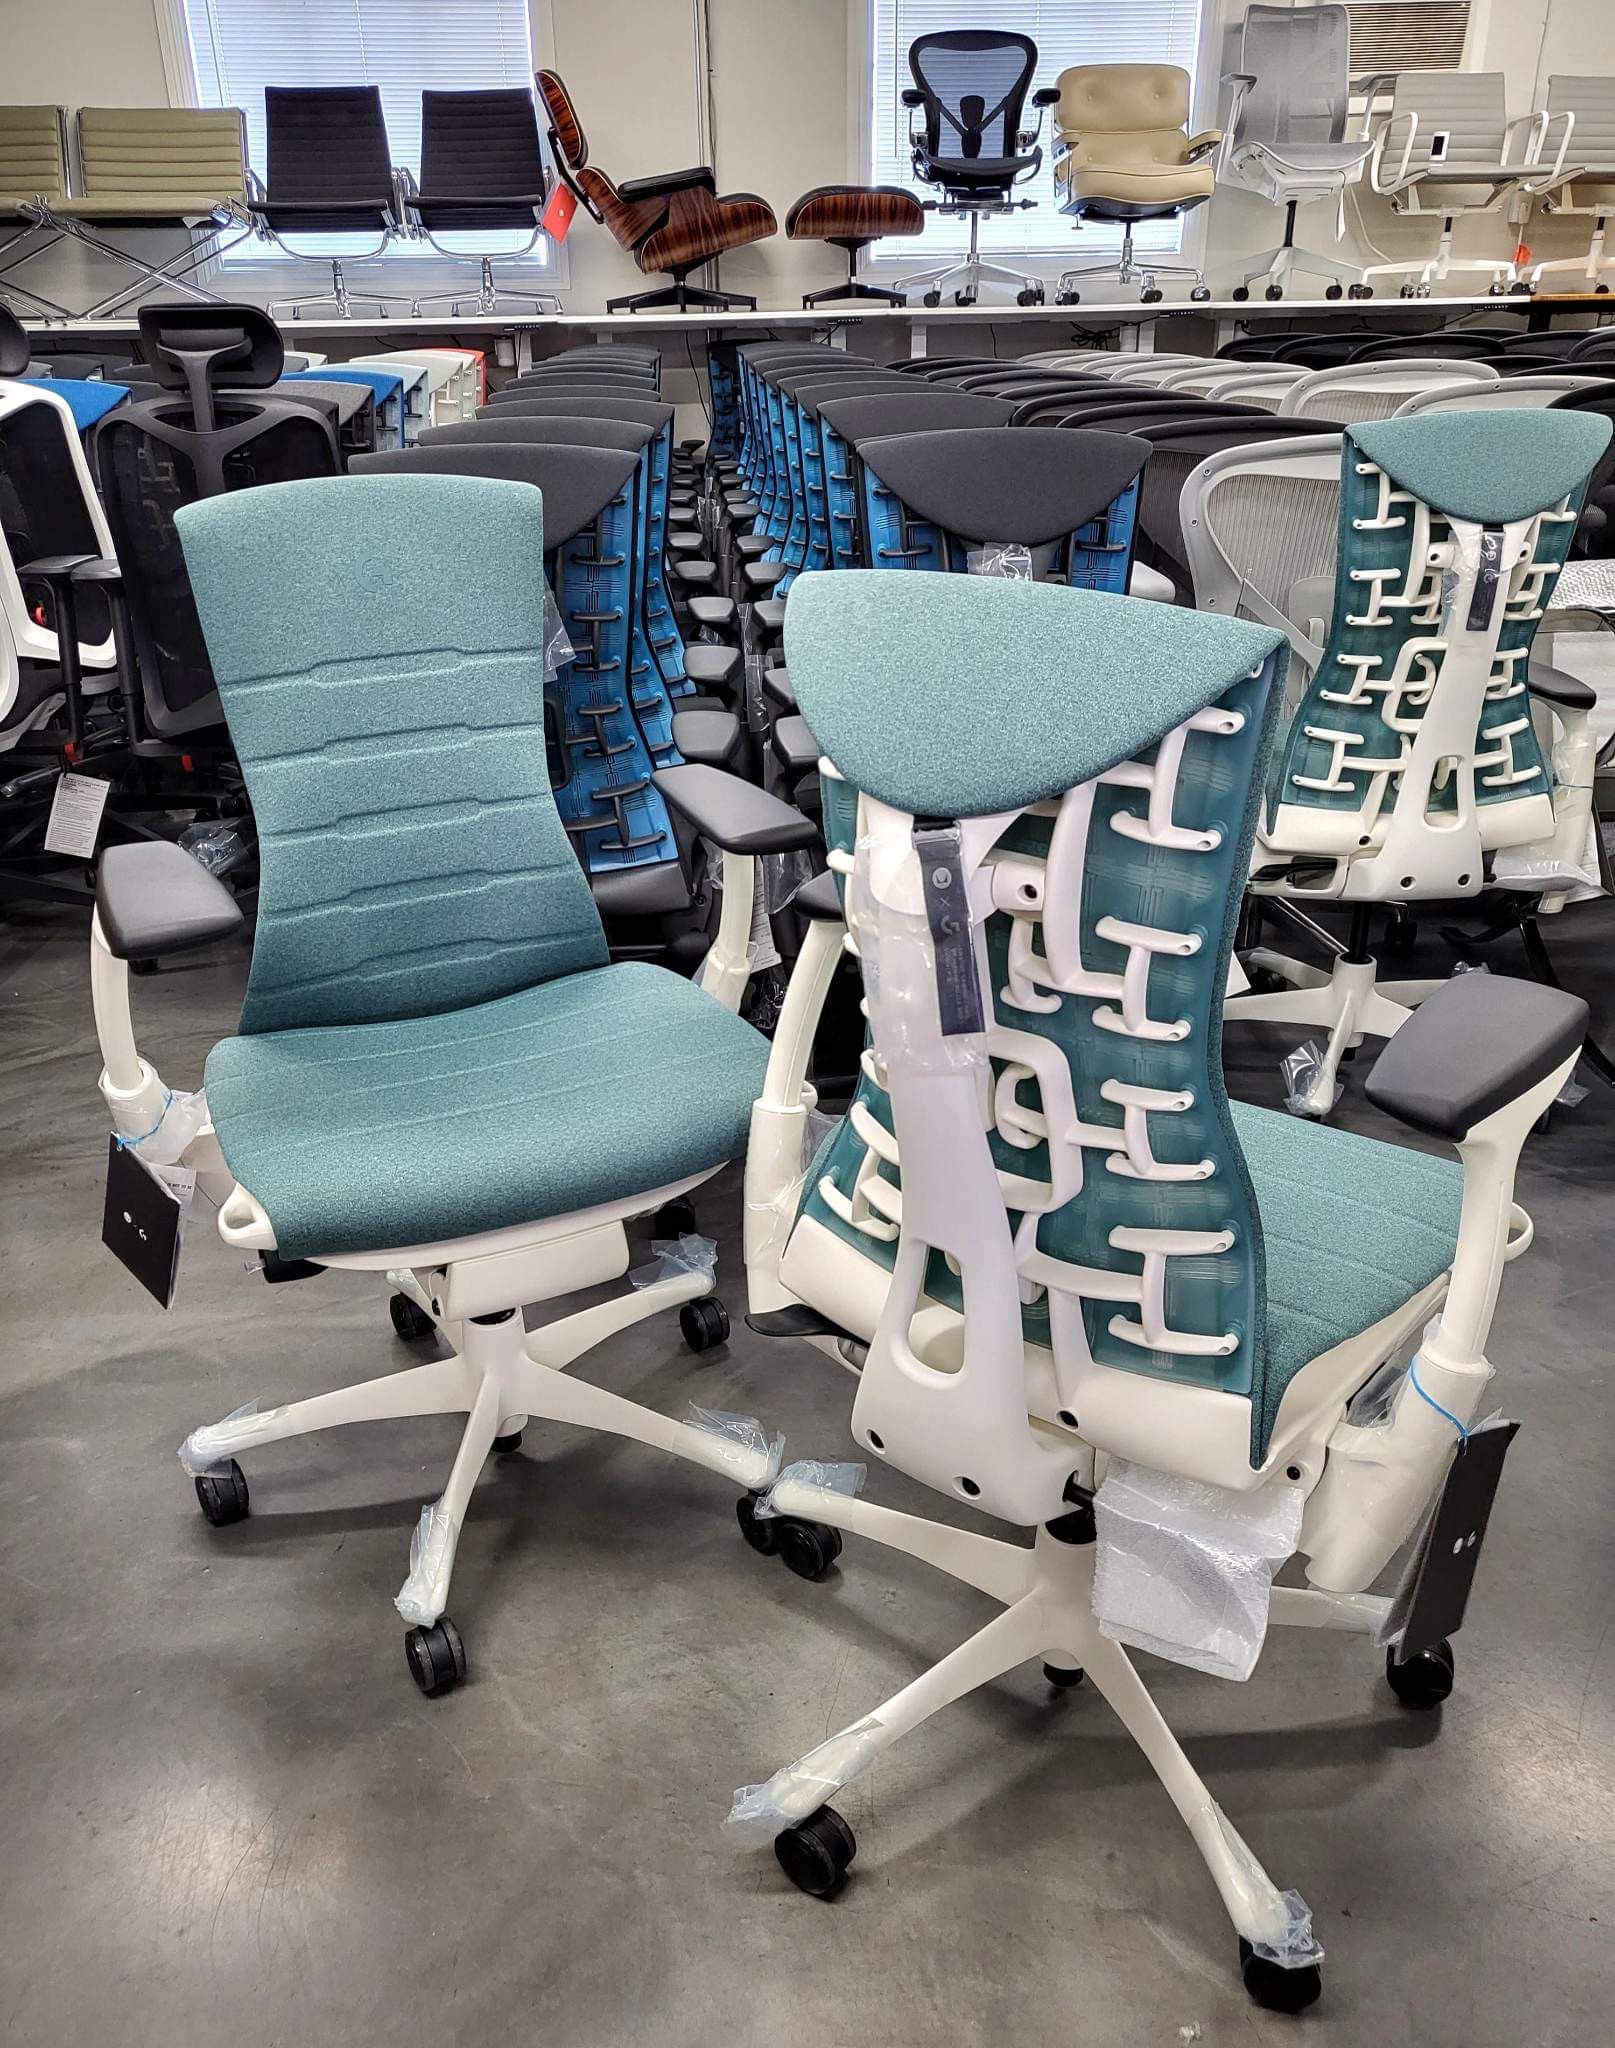 LARGEST INVENTORY OF HERMAN MILLER EMBODY CHAIRS STANDARD & LOGITECH ALL IN STOCK PICK-UP🔥DELIVERY🔥SHIPPING🔥 GUARANTEED LOWEST PRICES🔥